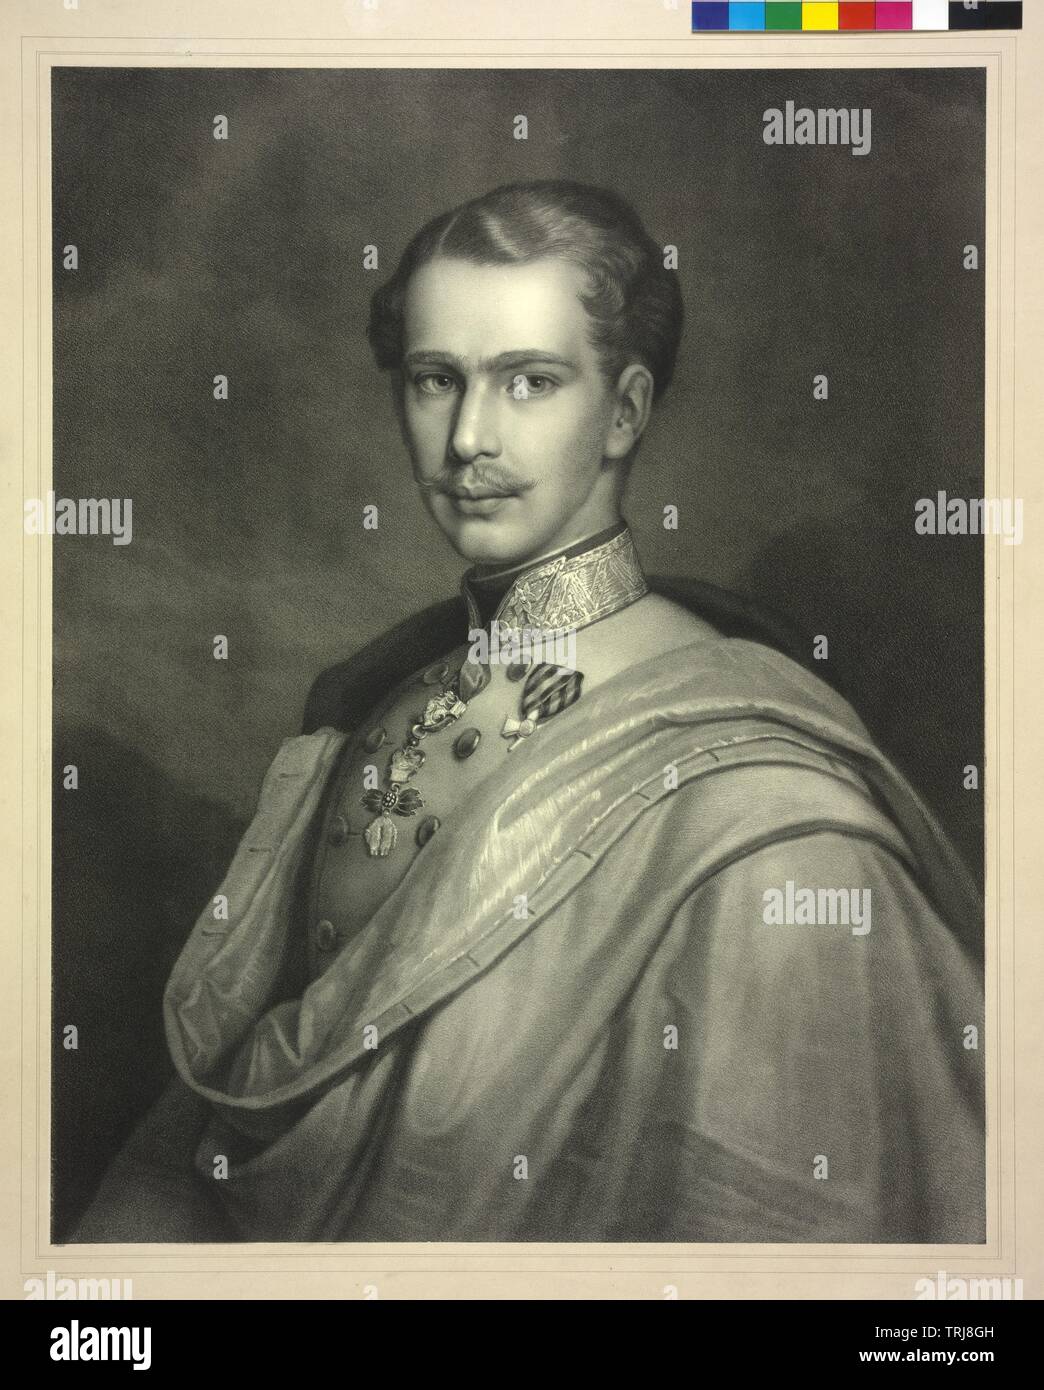 Franz Joseph I, Emperor of Austria, picture in young years as Colonel-in-Chief of the Imperial and Royal dragoon regiment, lithograph by Johann Georg carpenter, Additional-Rights-Clearance-Info-Not-Available Stock Photo